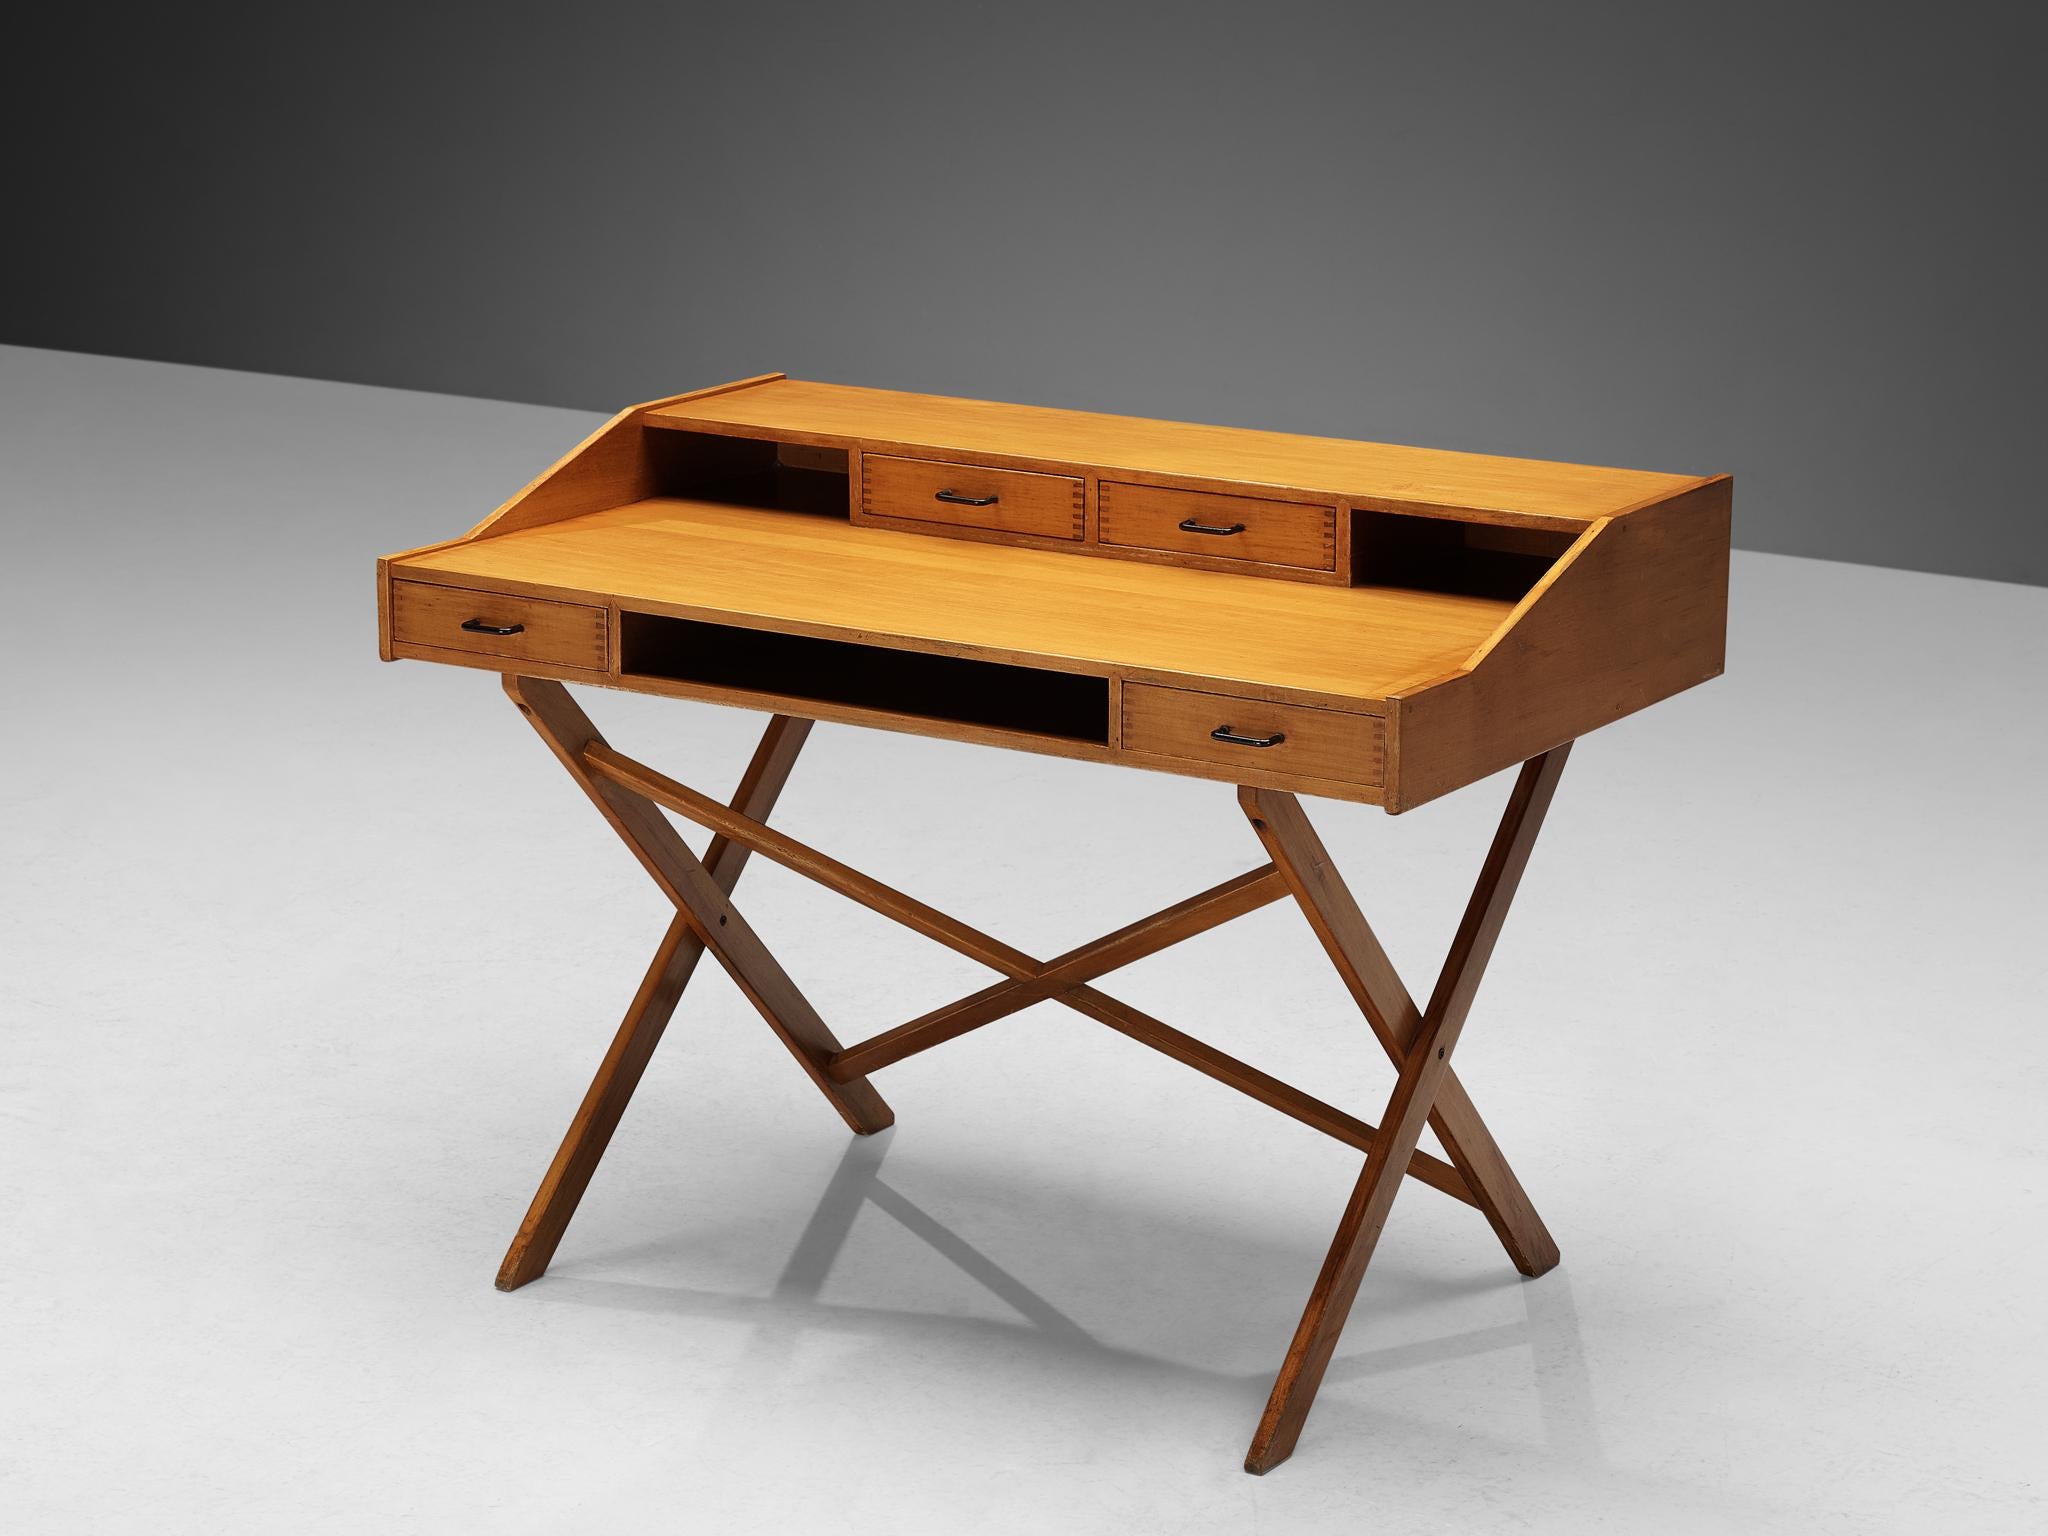 Gianfranco Frattini for Cantieri Carugati, writing desk, cherry, metal, Italy, 1958

This piece of furniture is based on a solid construction featuring straight lines and right-angled shapes. Functionality comes into play through the availability of